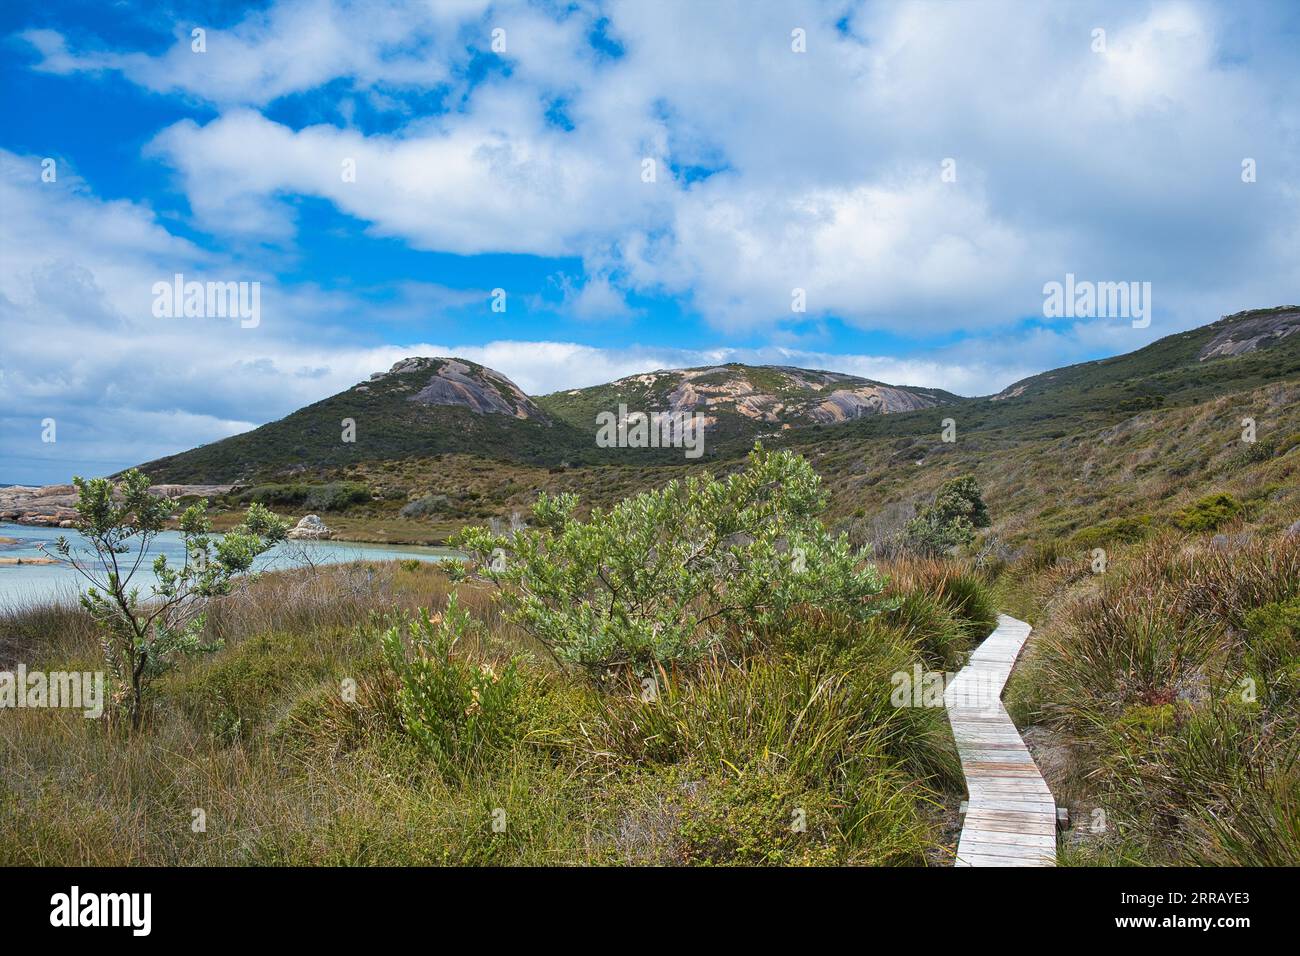 Wooden walkway through a saltwater marsh in Two Peoples Bay Nature Reserve, close to Albany, Western Australia. Granite headland in the background. Stock Photo